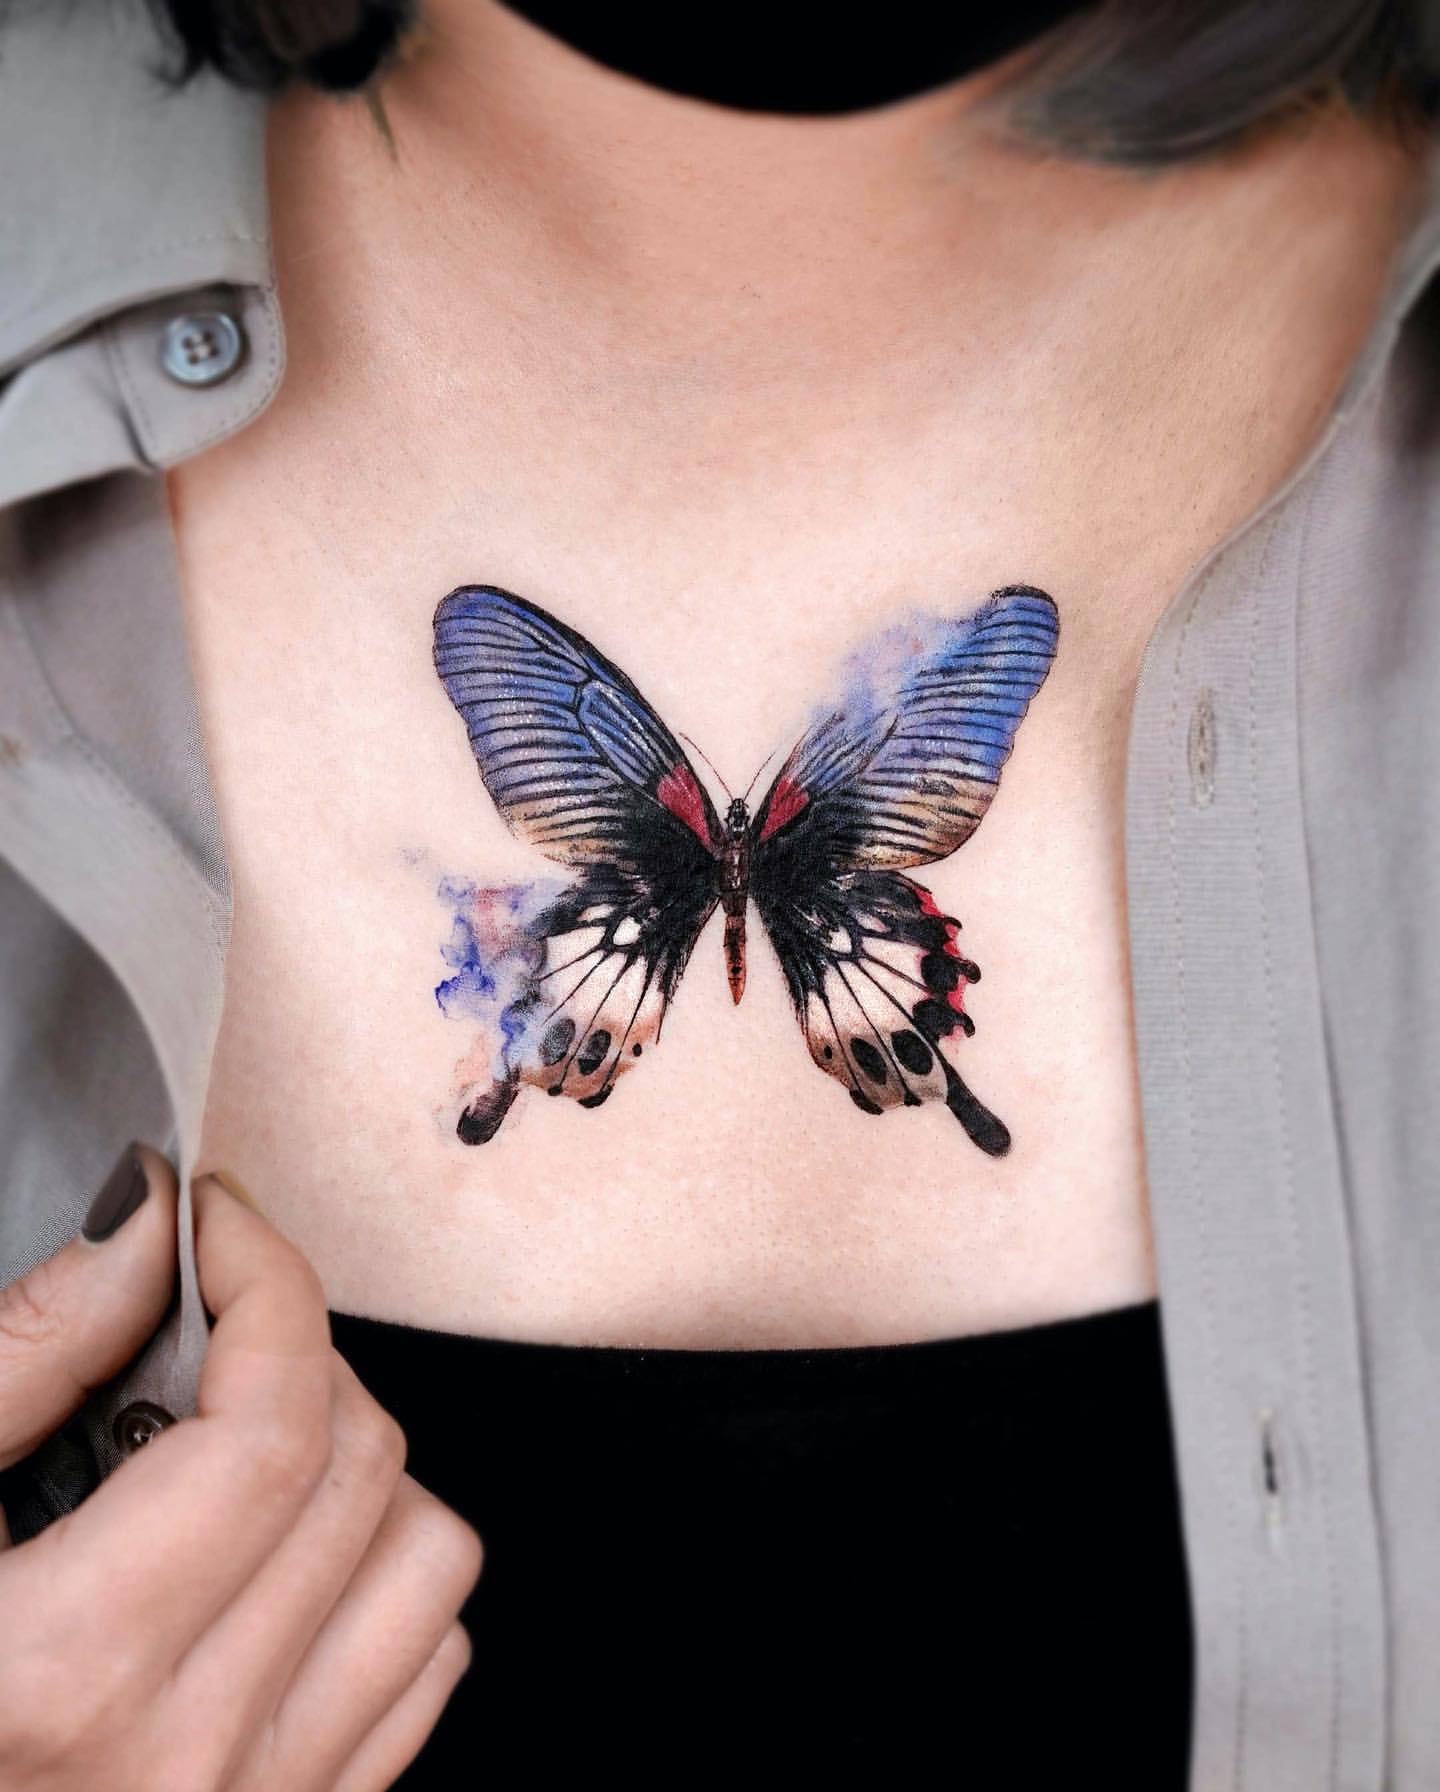 Chest Tattoos Ideas for Women 11